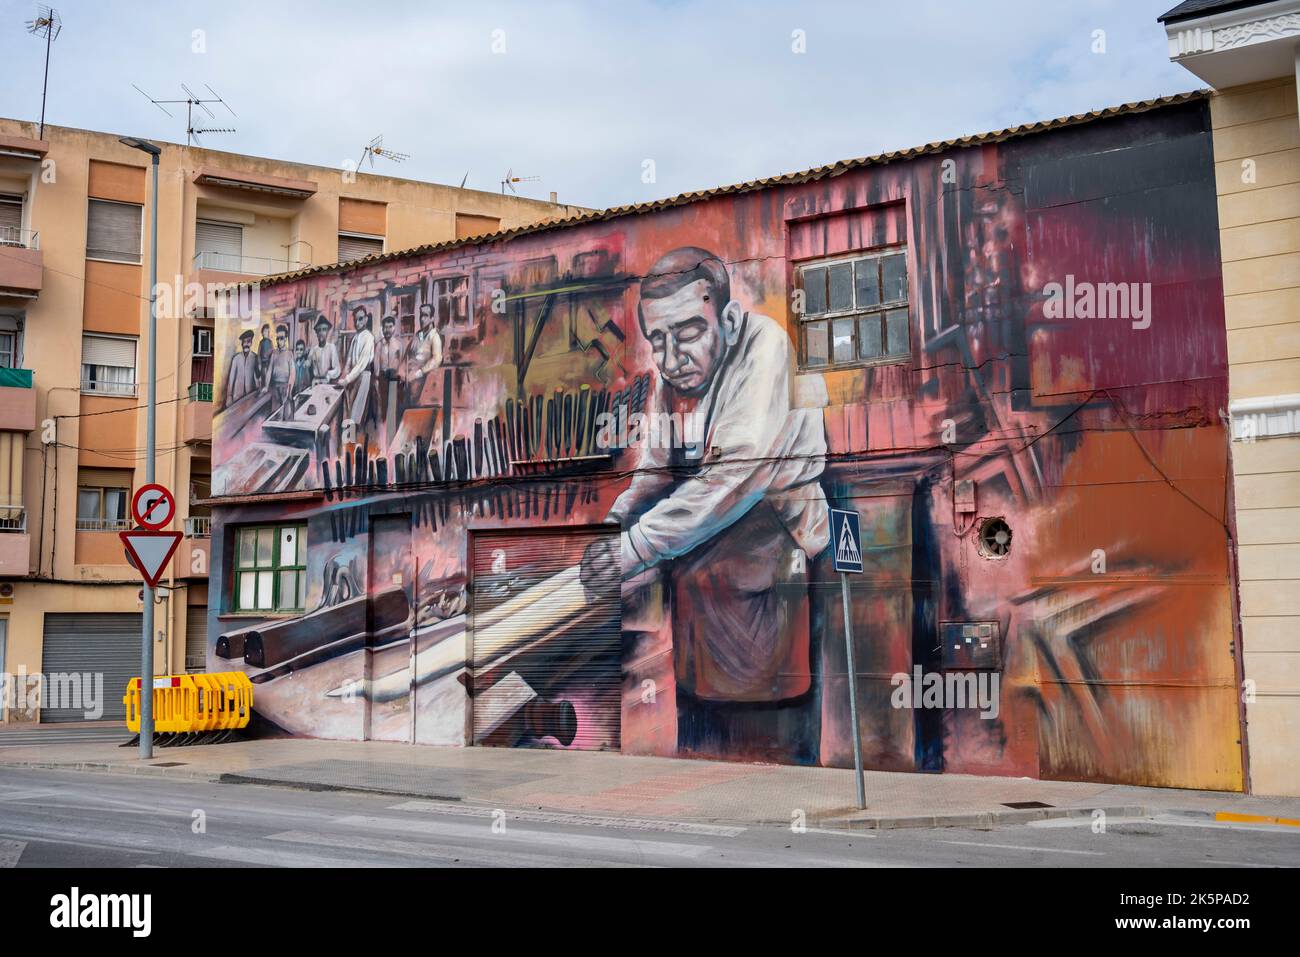 Large mural on the side of a building in Rojales following the Rojales in painting festival designed to revitalise decaying buildings. Workshop scene Stock Photo